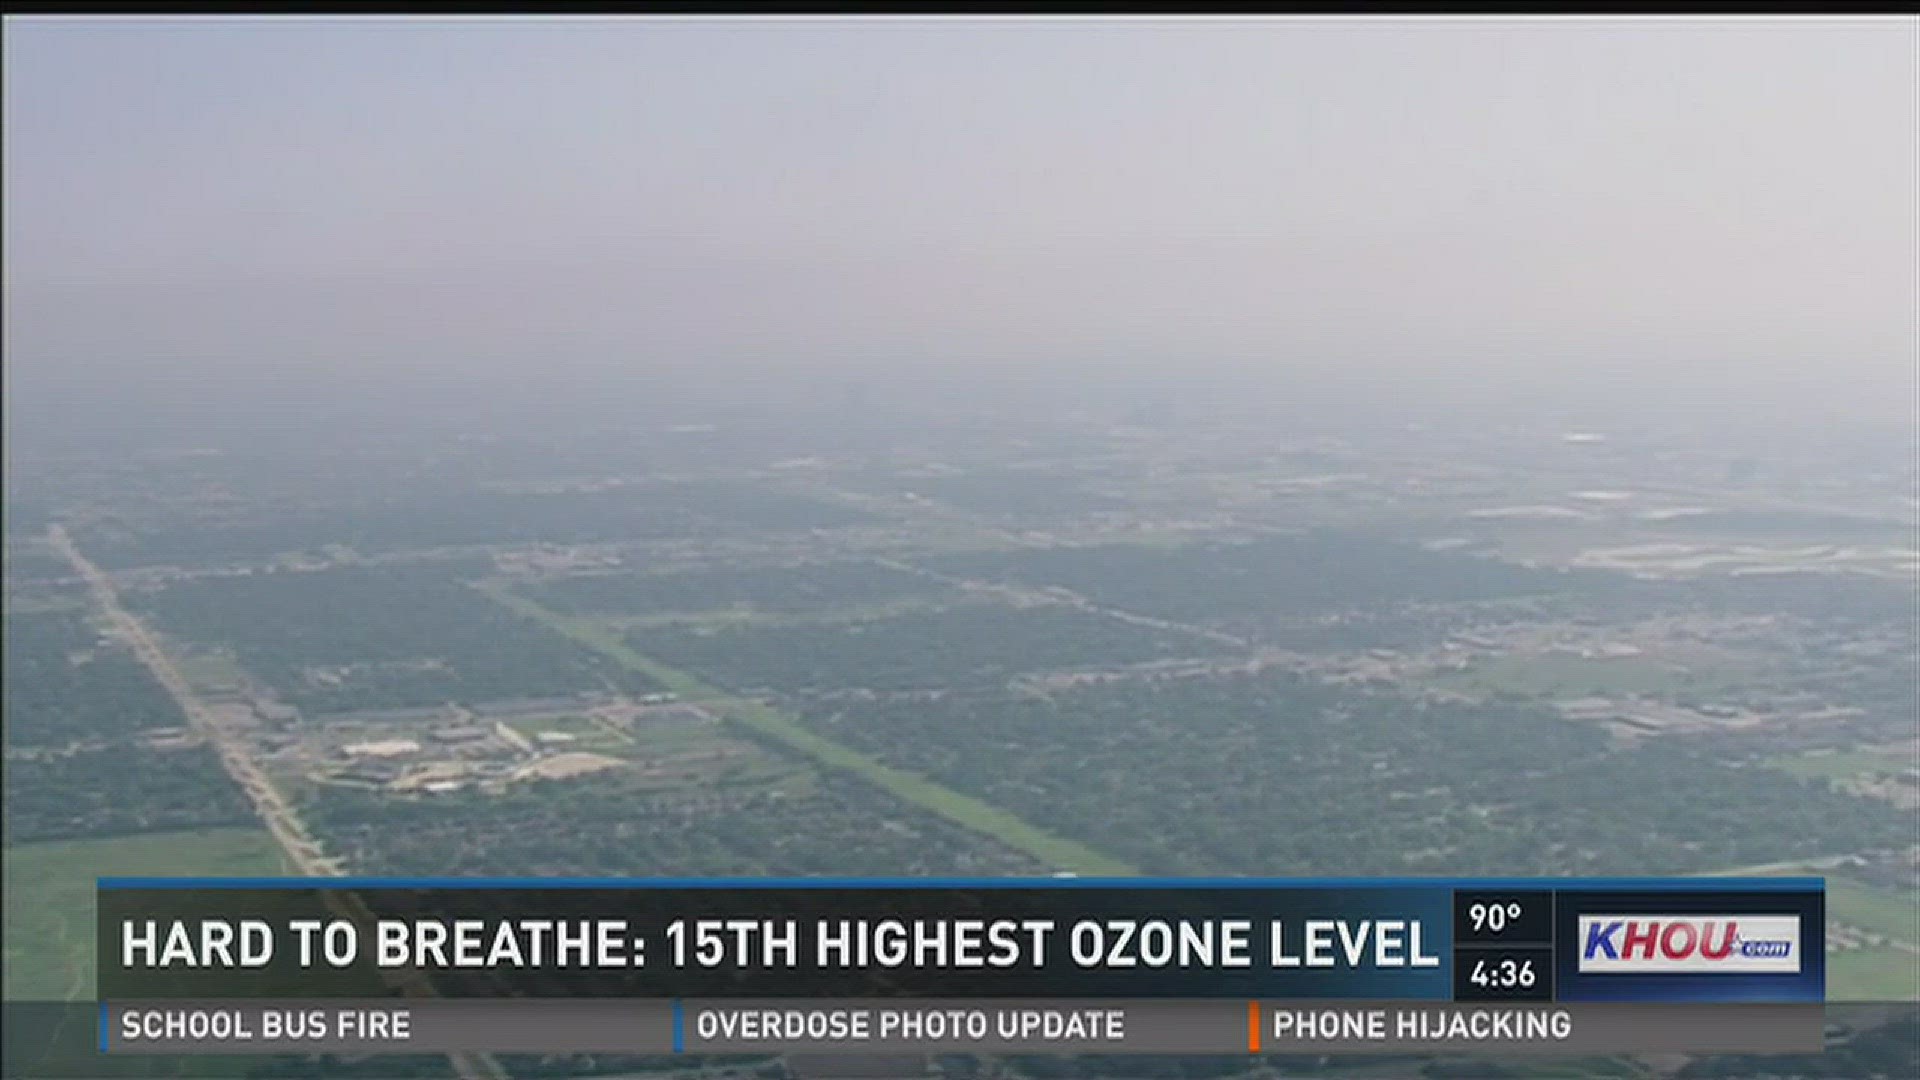 Houston's air quality has improved over time.